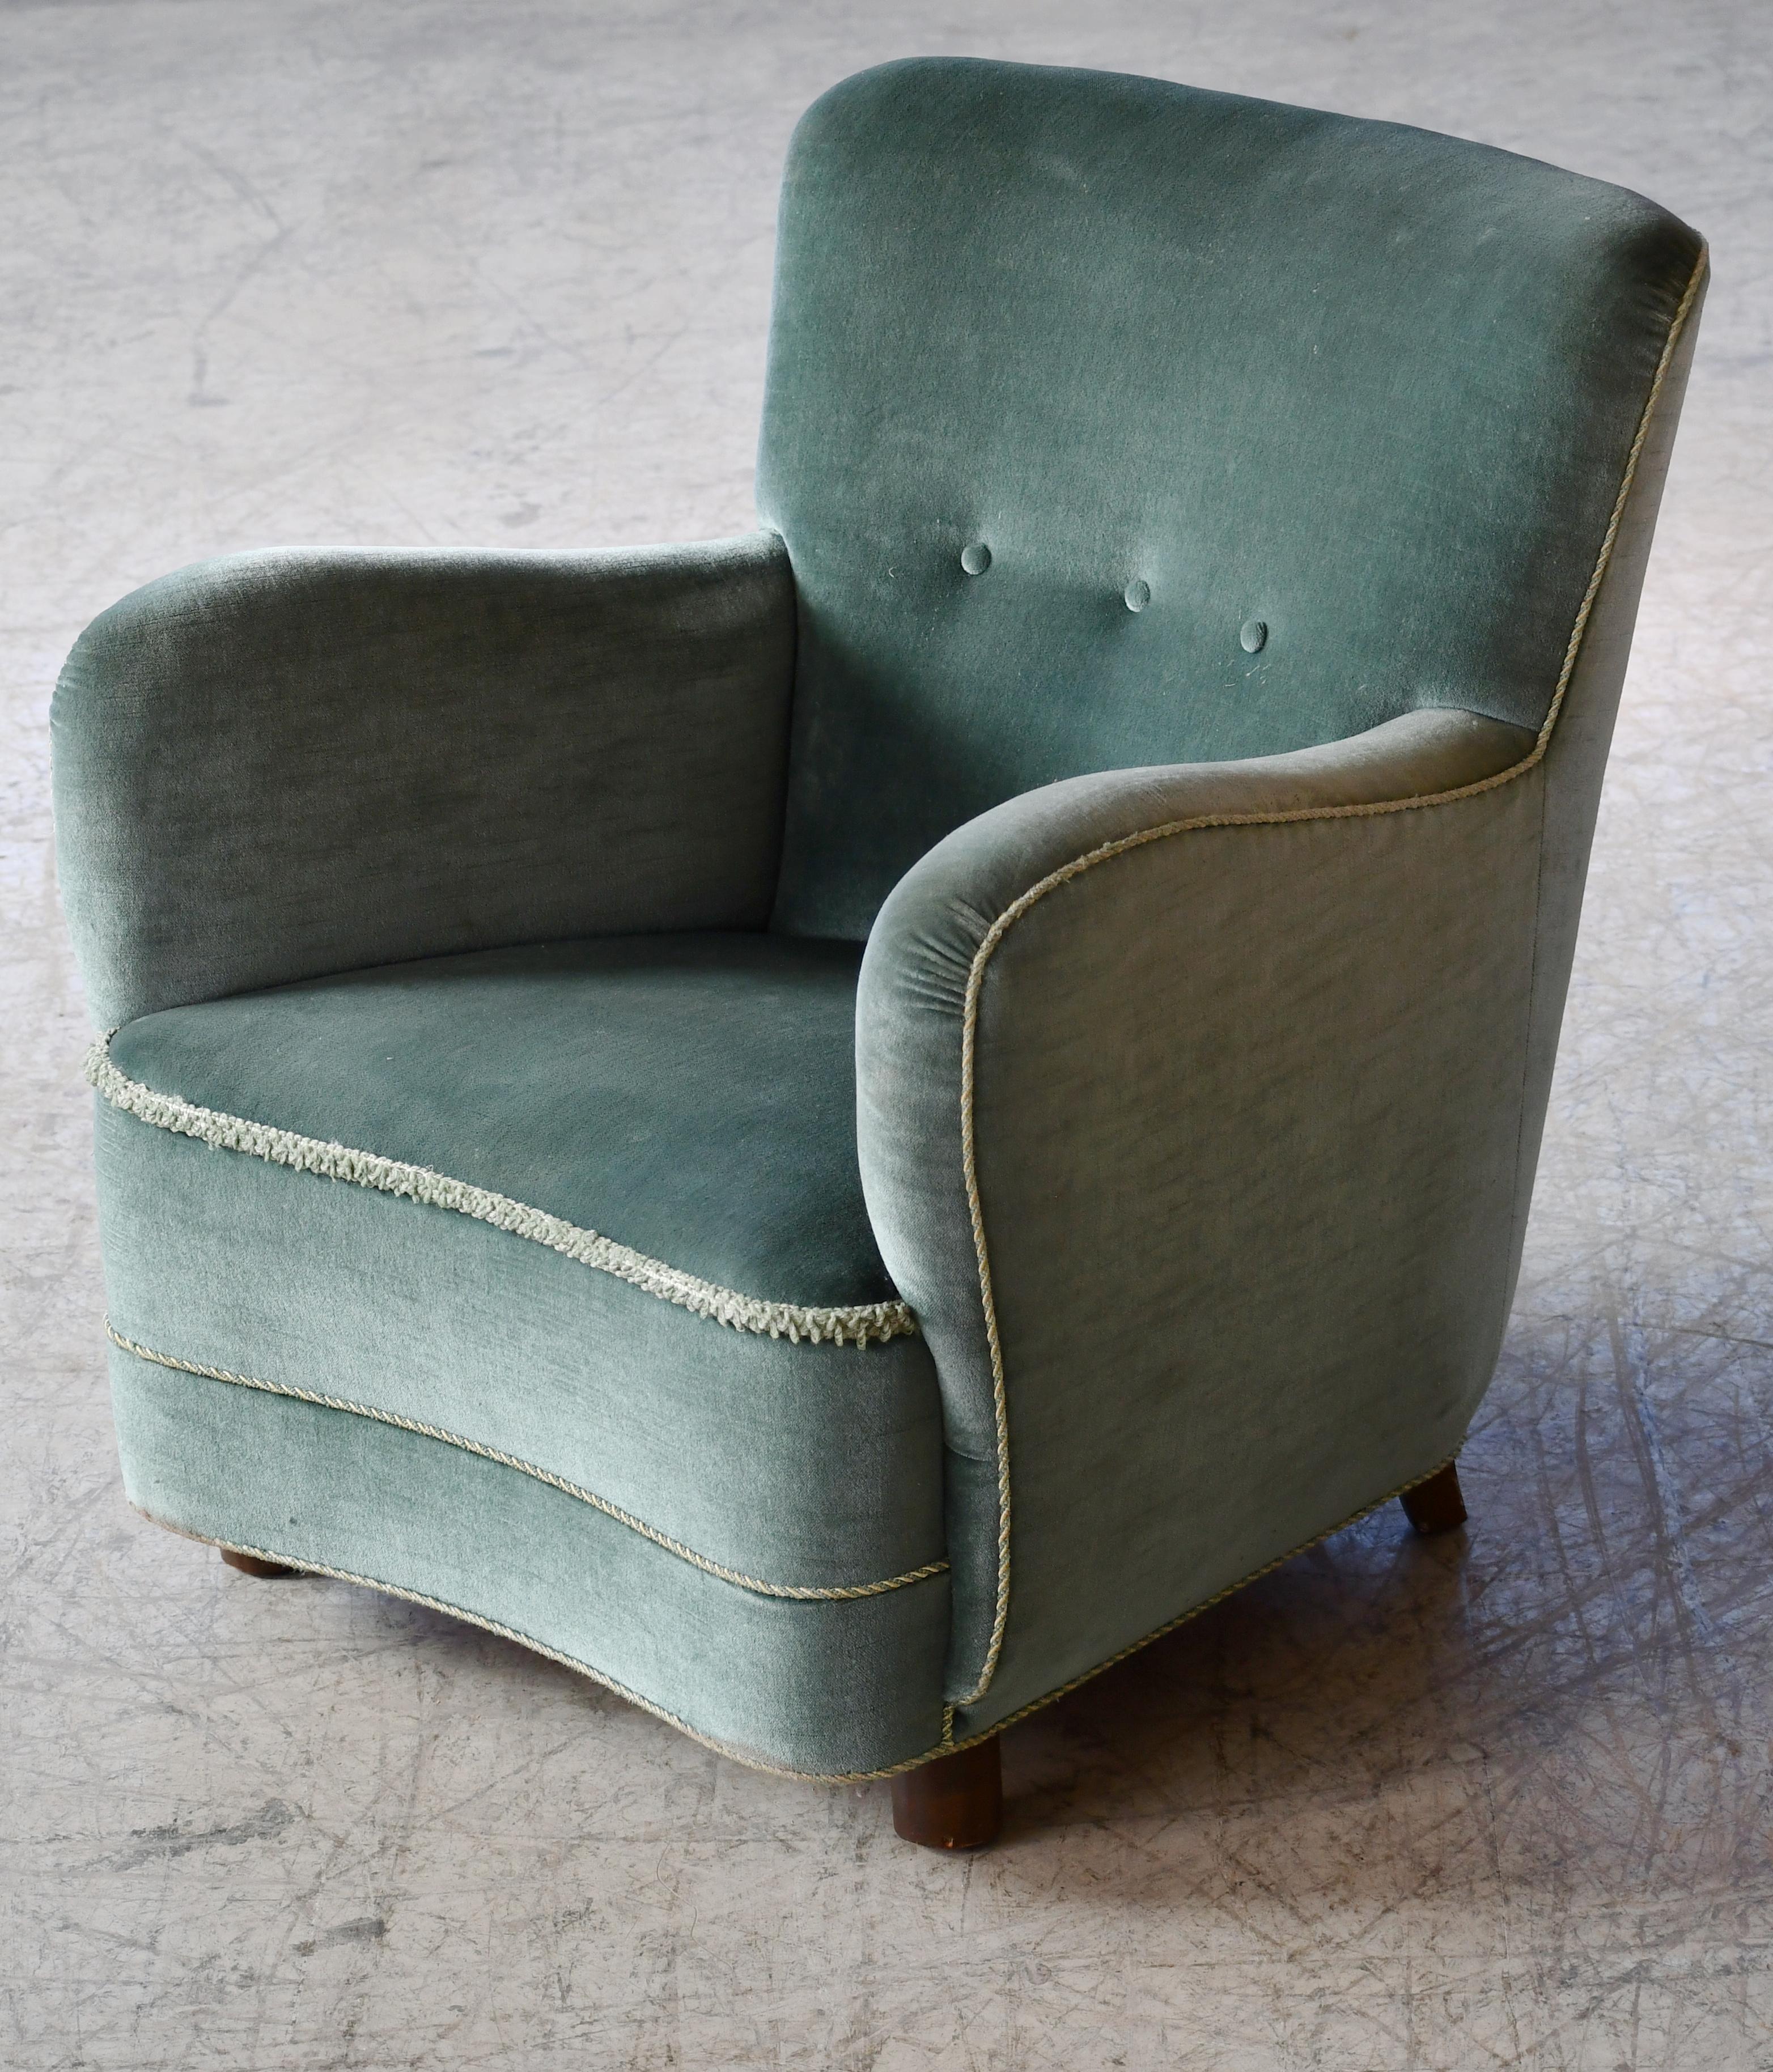 Danish Art Deco or Early Midcentury Lounge Chair in Green Mohair 1930-40s In Good Condition For Sale In Bridgeport, CT